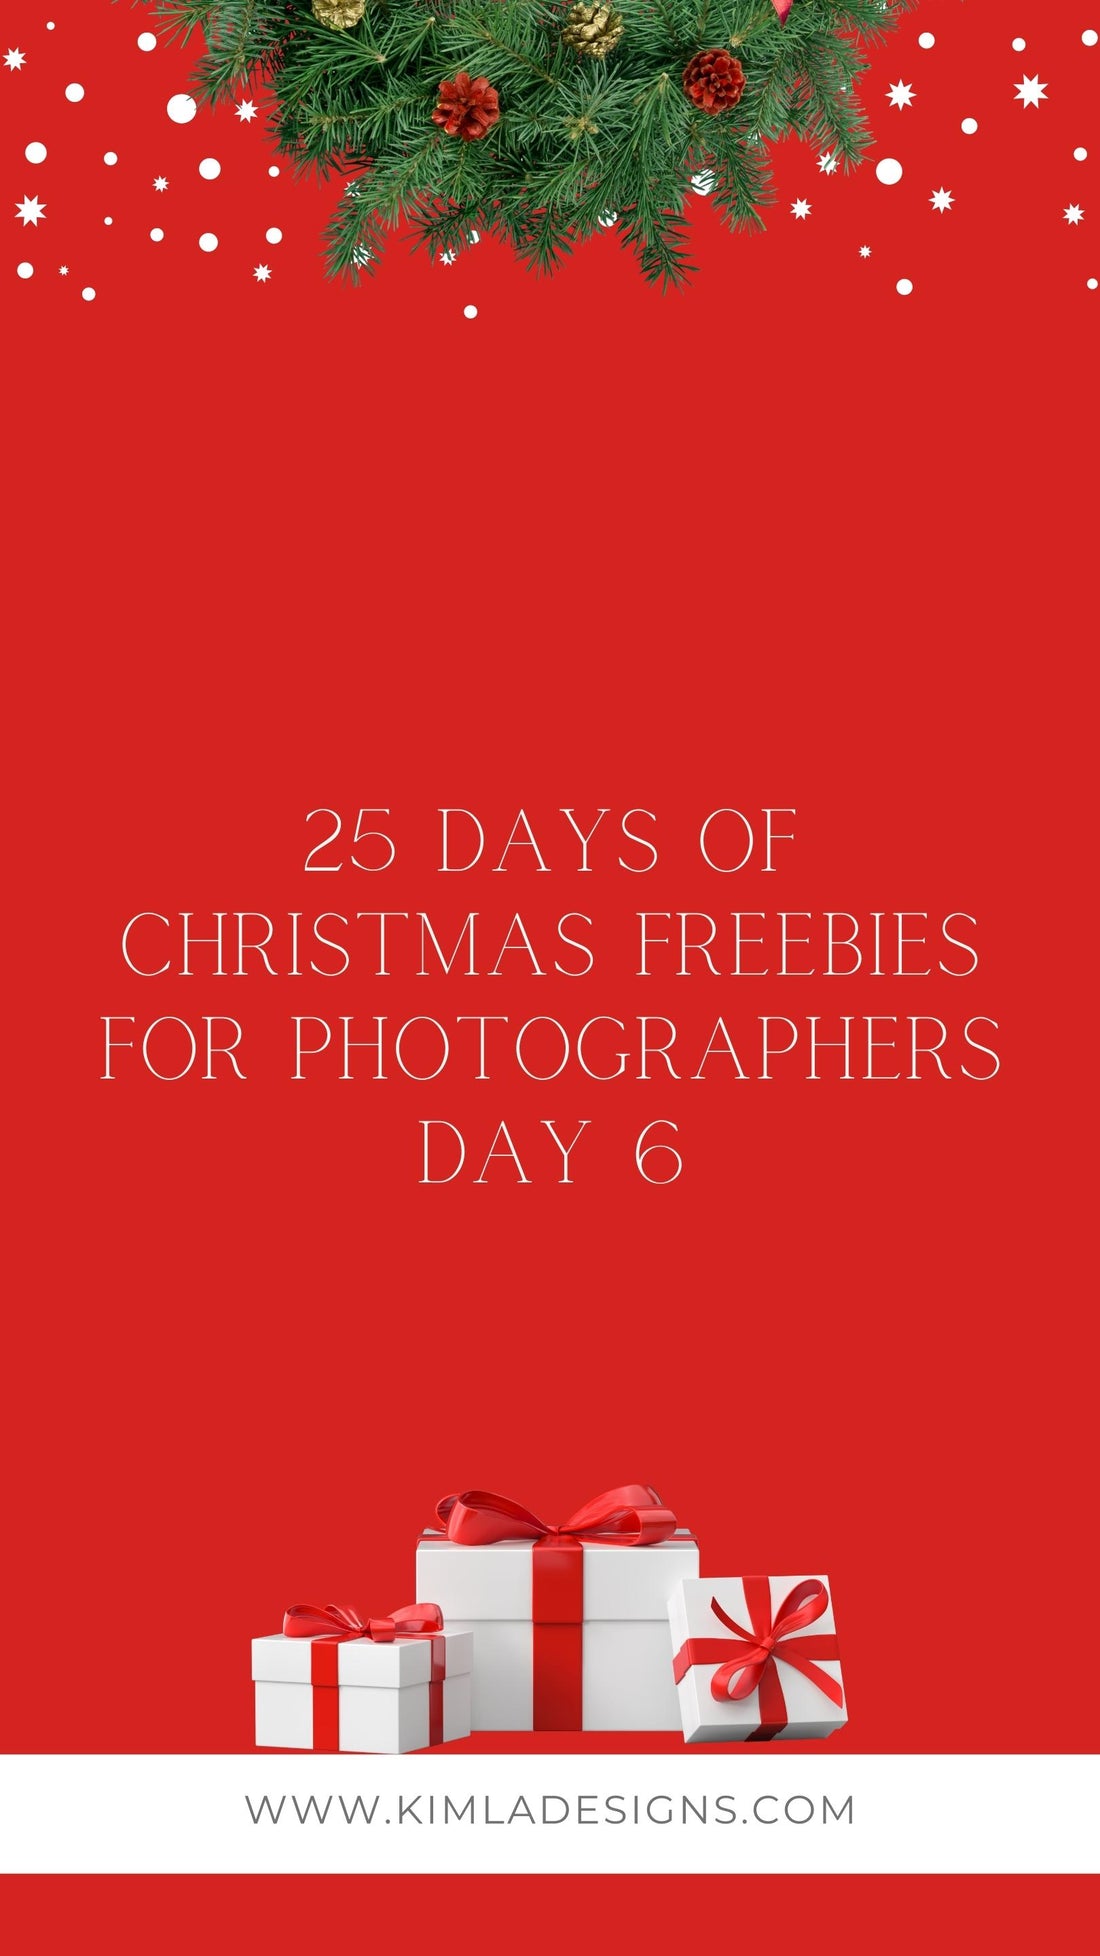 25 Days of Christmas Freebies Day 6th